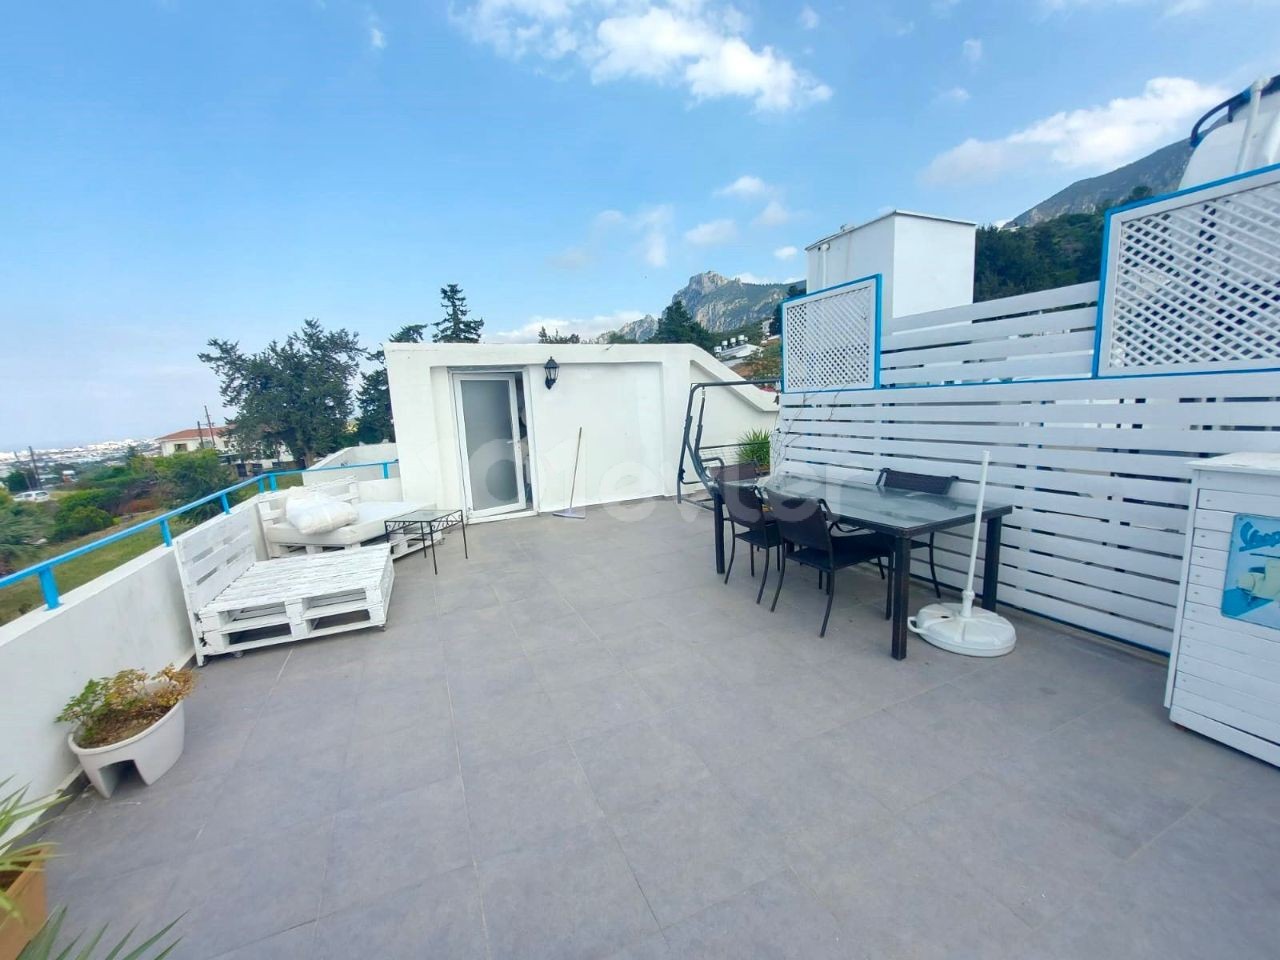 2+1 Luxury Apartment for Sale in Edremit with Roof Terrace and Great Views in a Well-Kept Complex with Pool. . 